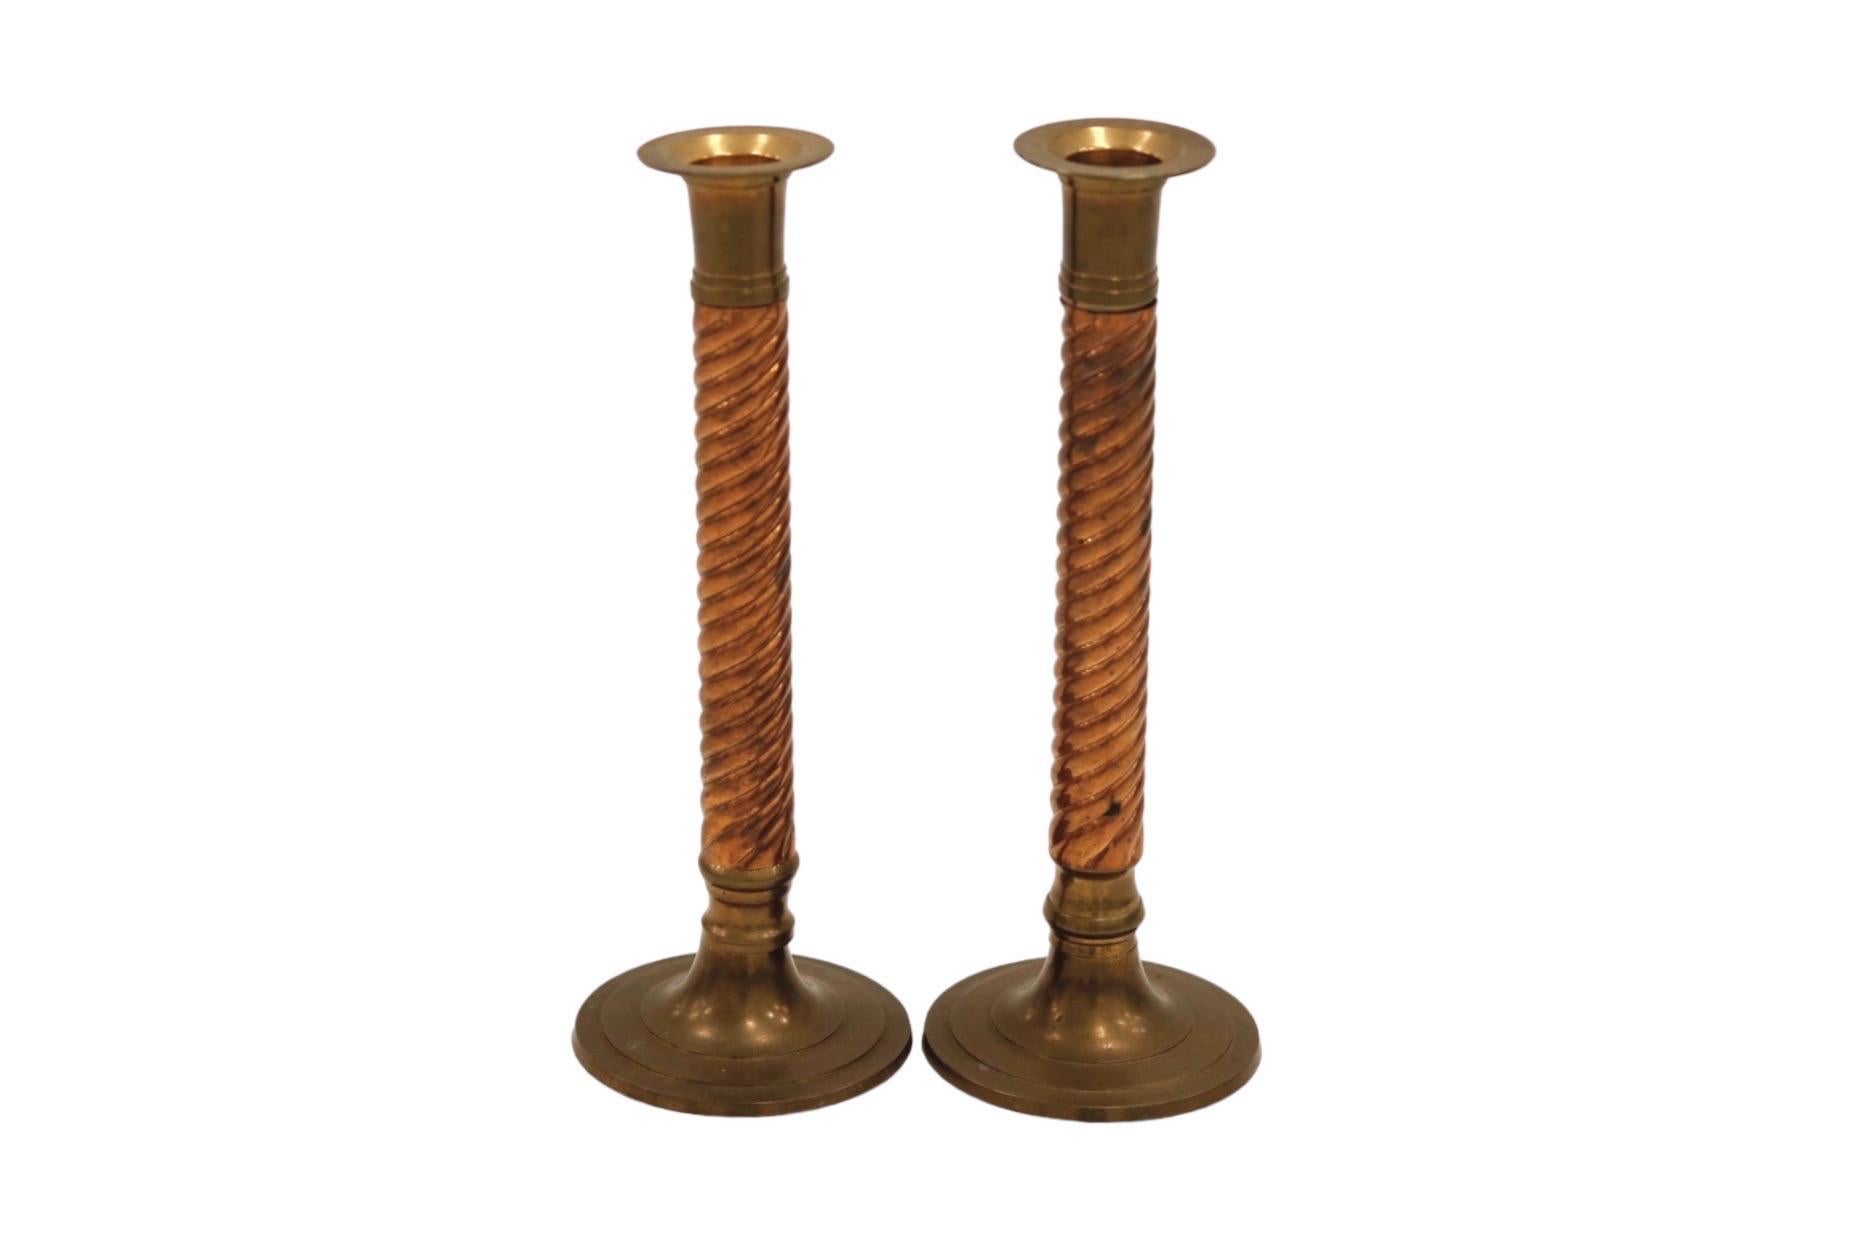 A pair of barley twist brass and copper candlestick holders. Solid brass is decorated with twisted reeded copper columns. Broad rimmed capitals mirror round elegant bases. Dimensions per candlestick.
